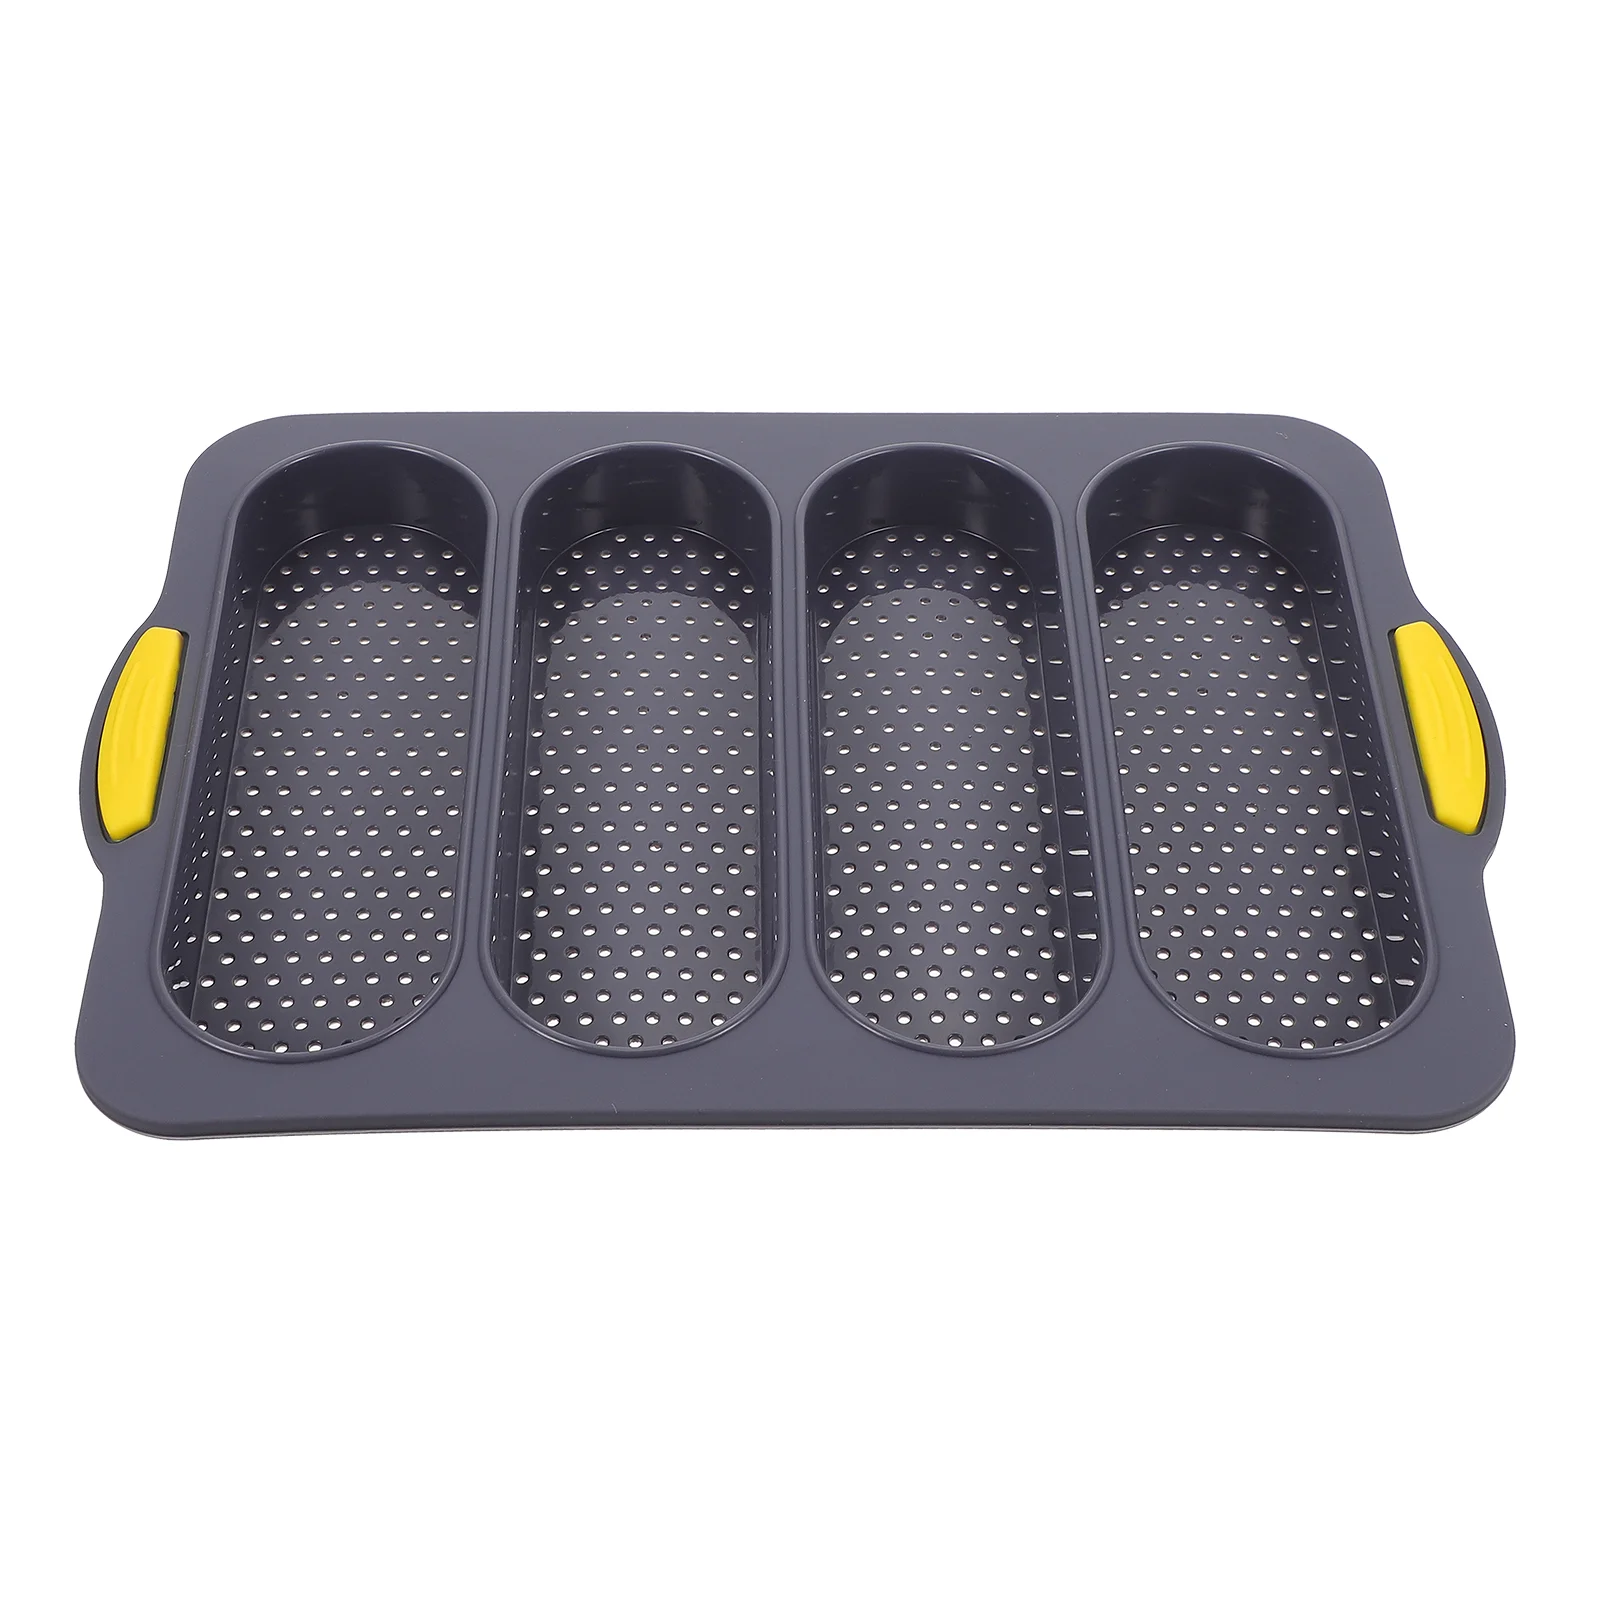 

4 Slot Silicone Mold Loaf Bread Bakeware Supplies Mini Molds Cake Pans Baking Utensils